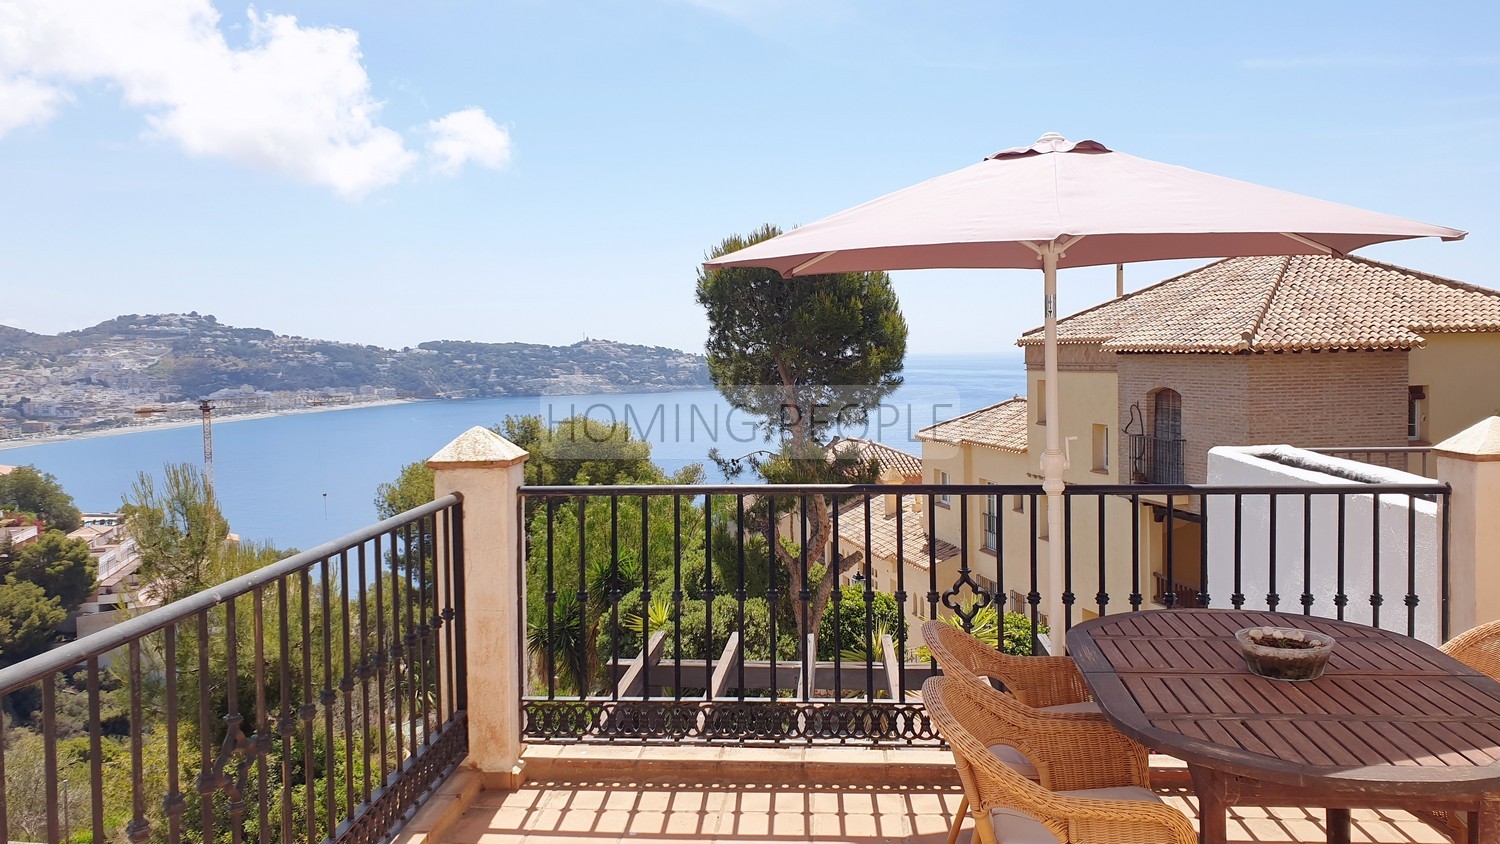 Bright family house, with terraces, private parking... and beautiful views over the bay !